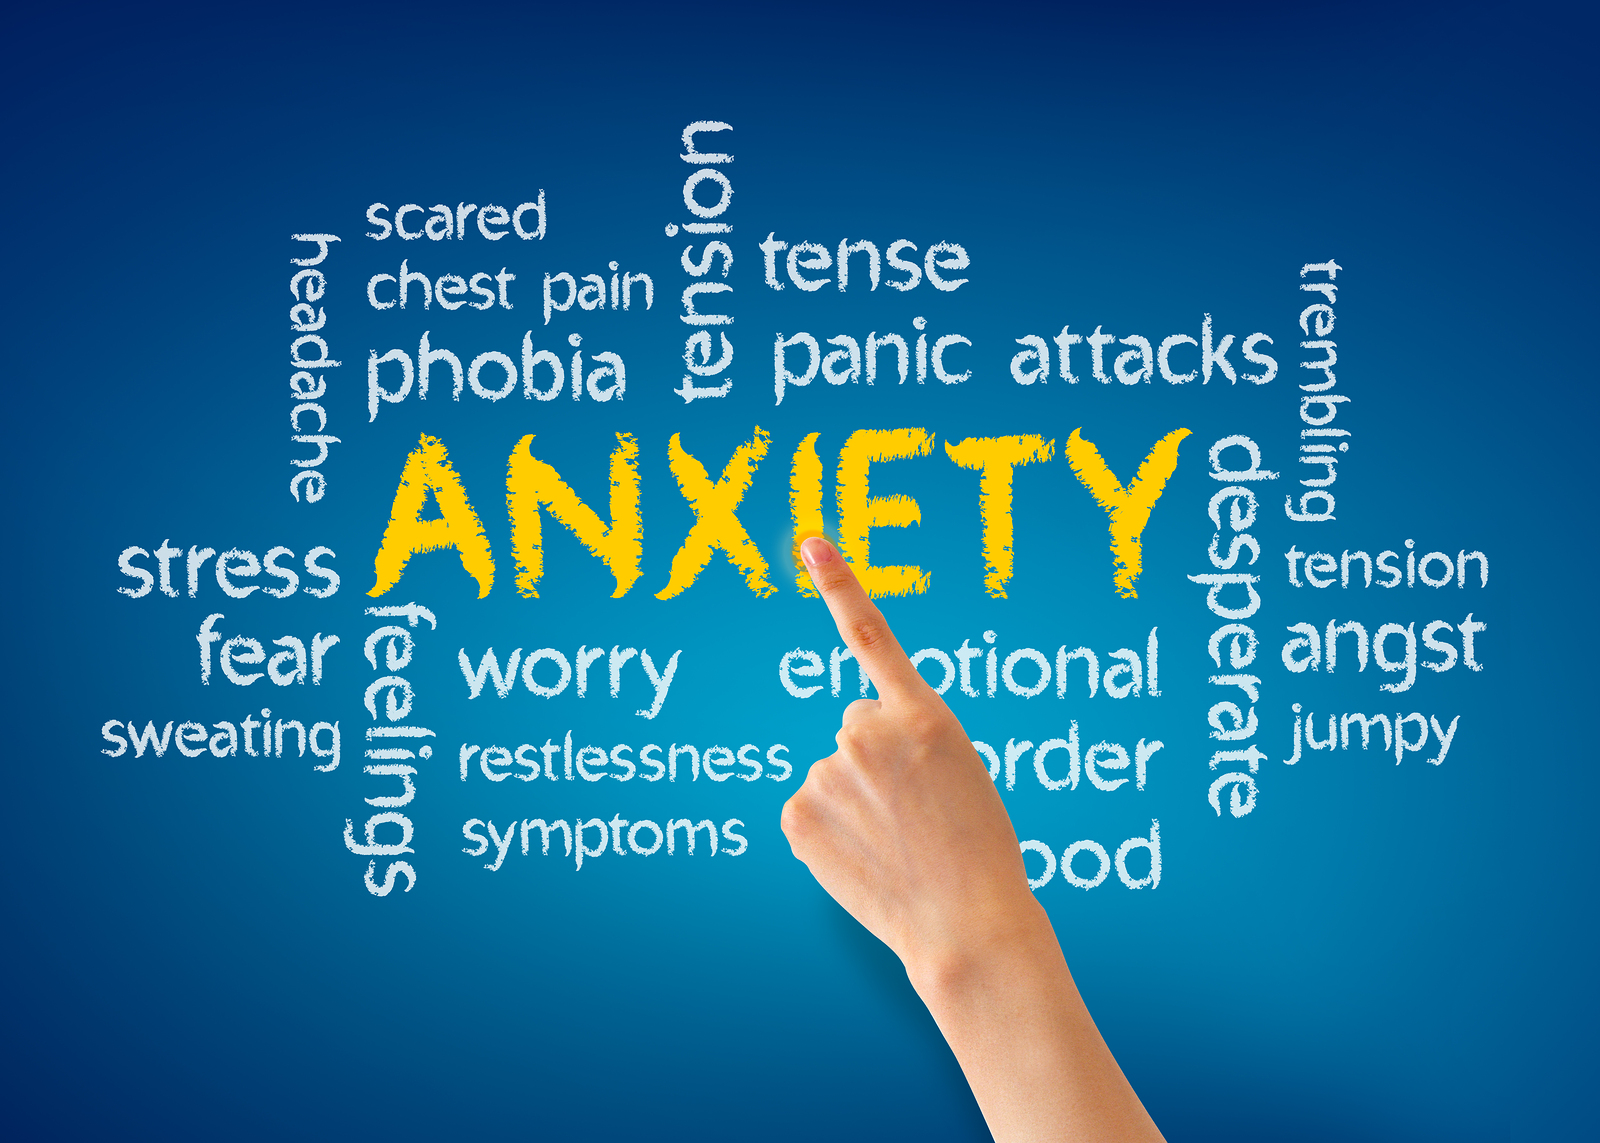  Anxiety disorder: